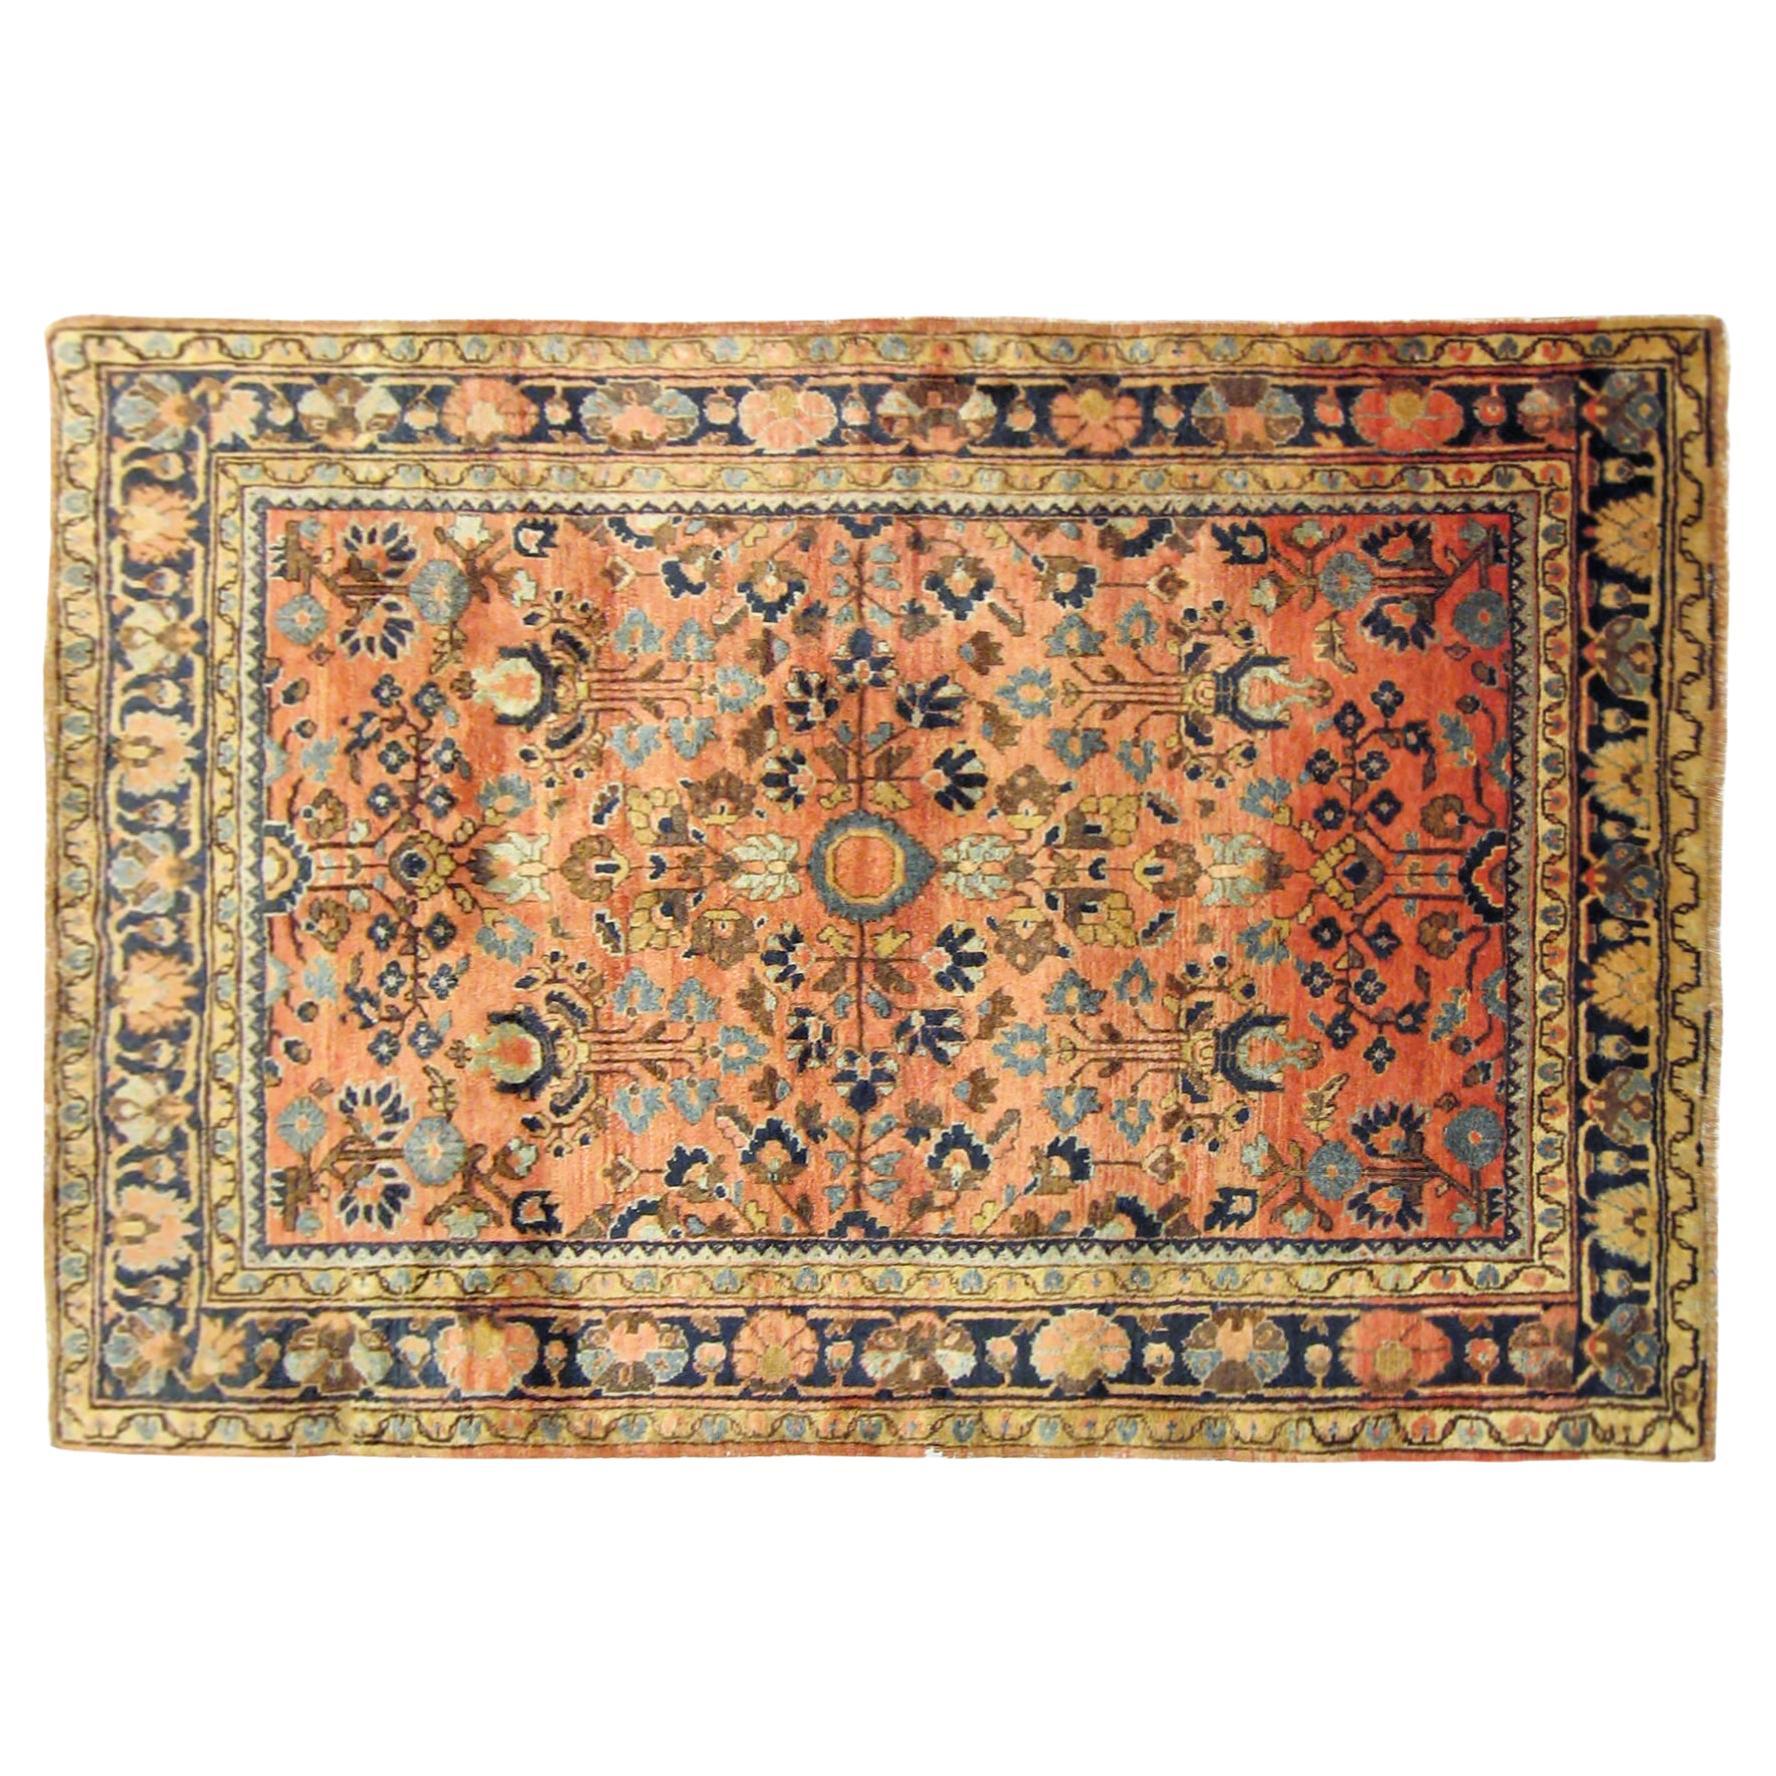 Antique Persian Sarouk Oriental Rug, in Small size, with Intricate Floral Design